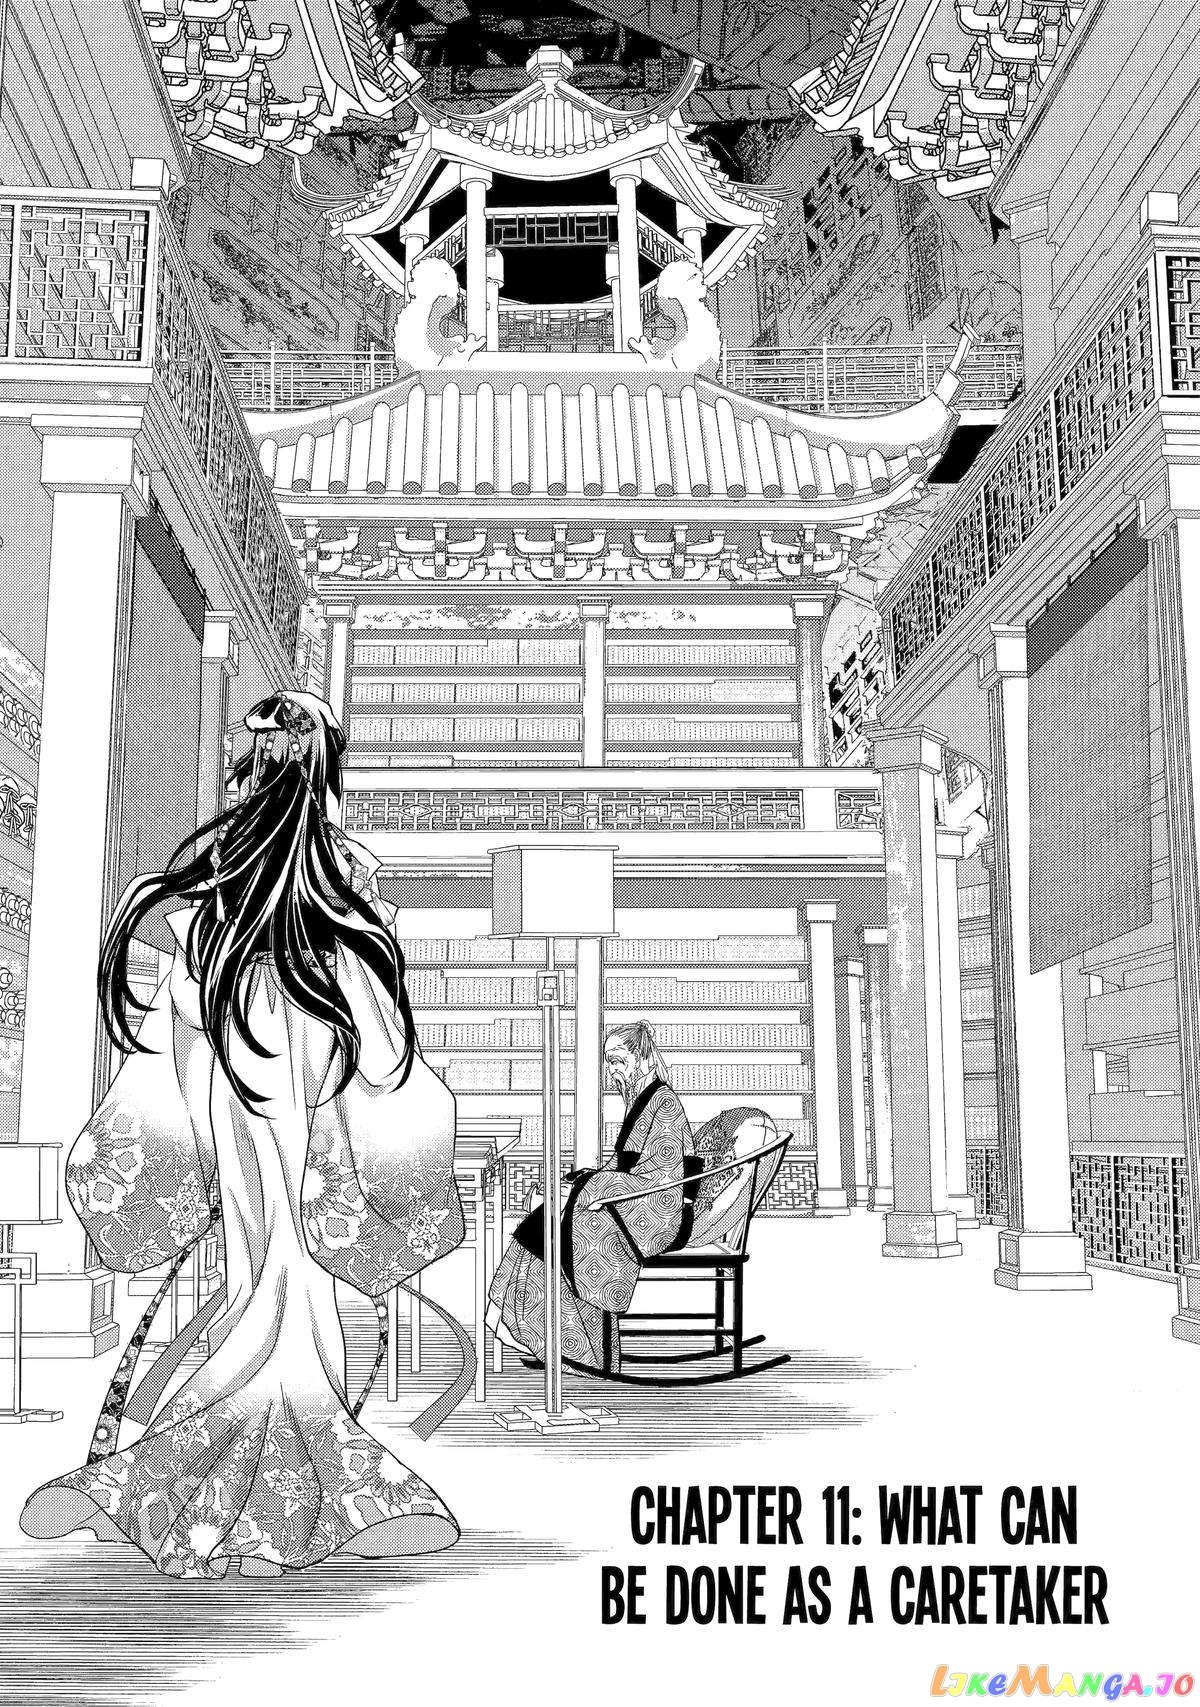 The Emperor's Caretaker: I'm Too Happy Living as a Lady-in-Waiting to Leave the Palace chapter 11 - page 1